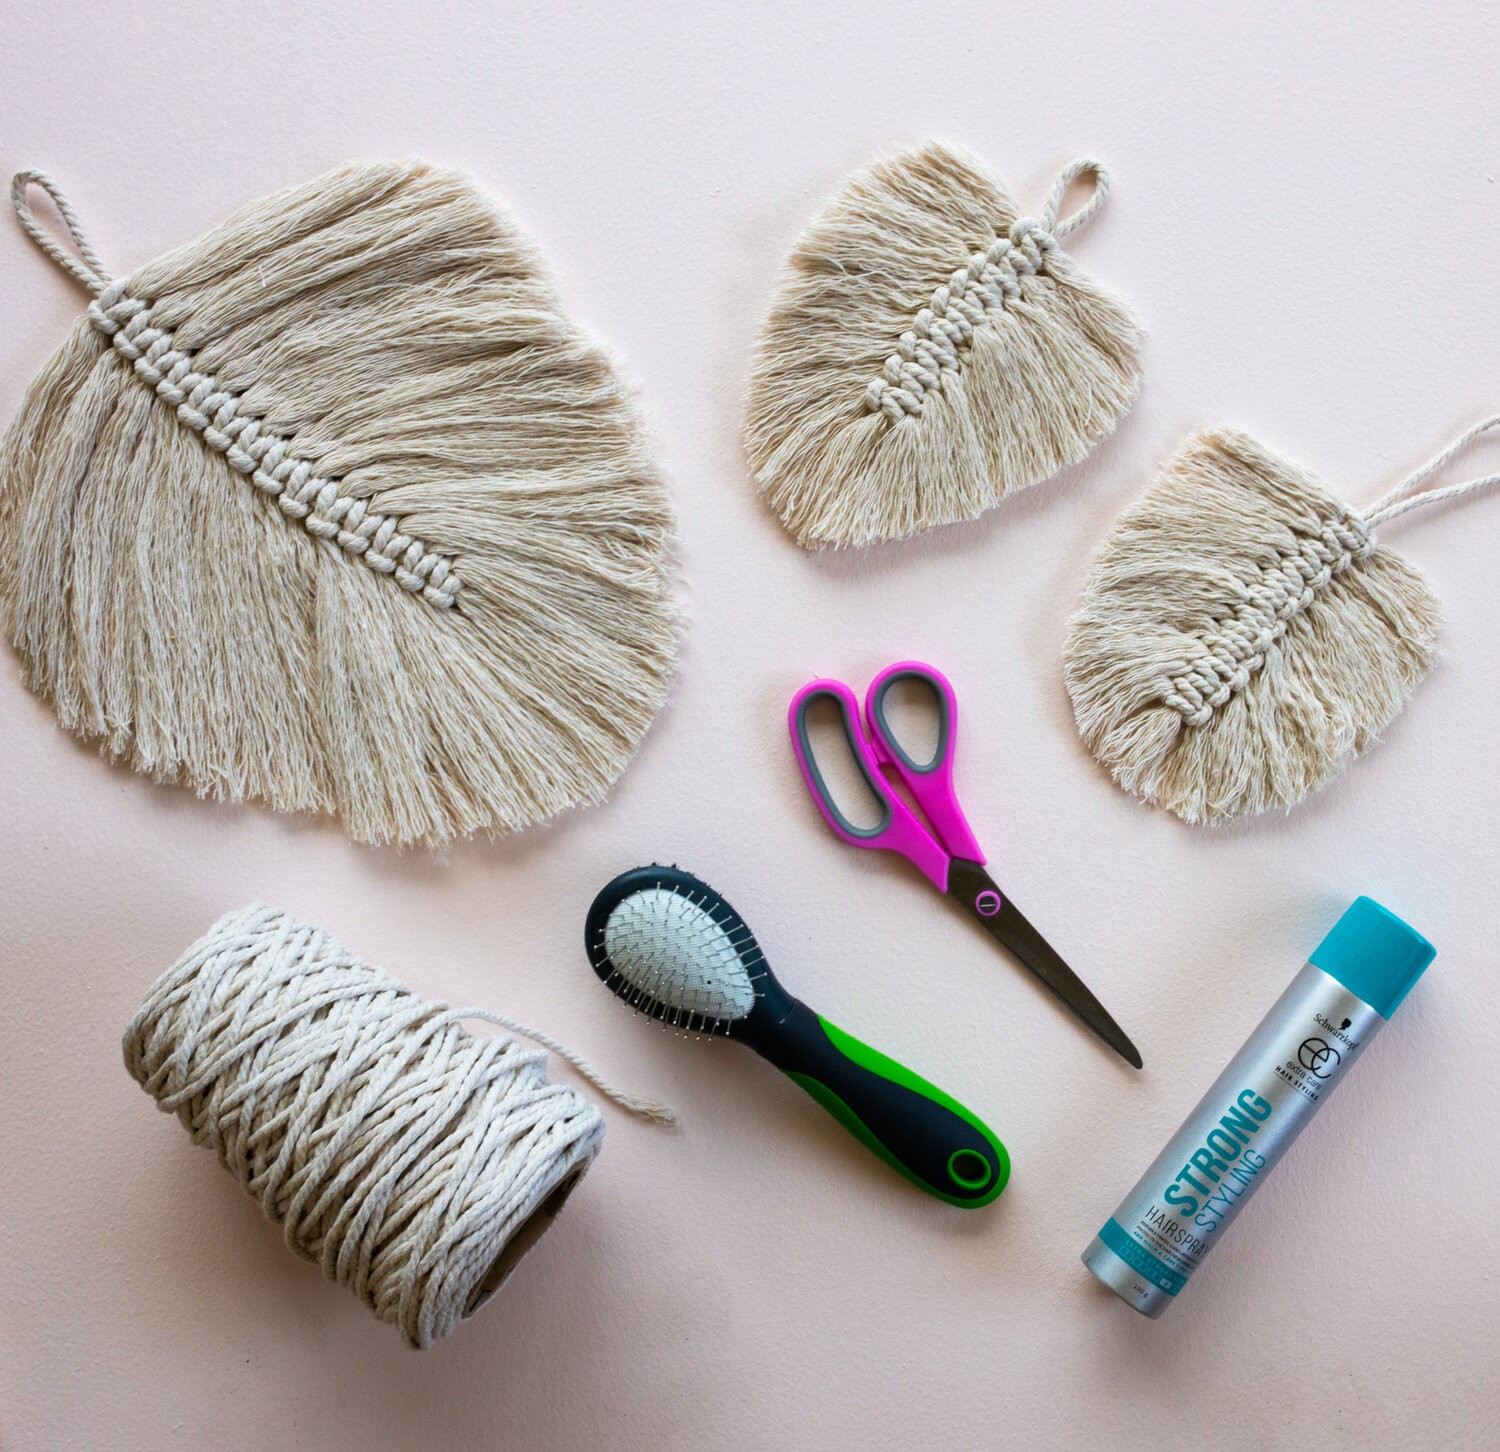 Finished macrame leaves and supplies for the project lie on a table - scissors, macrame string, a hairbrush, and hairspray.